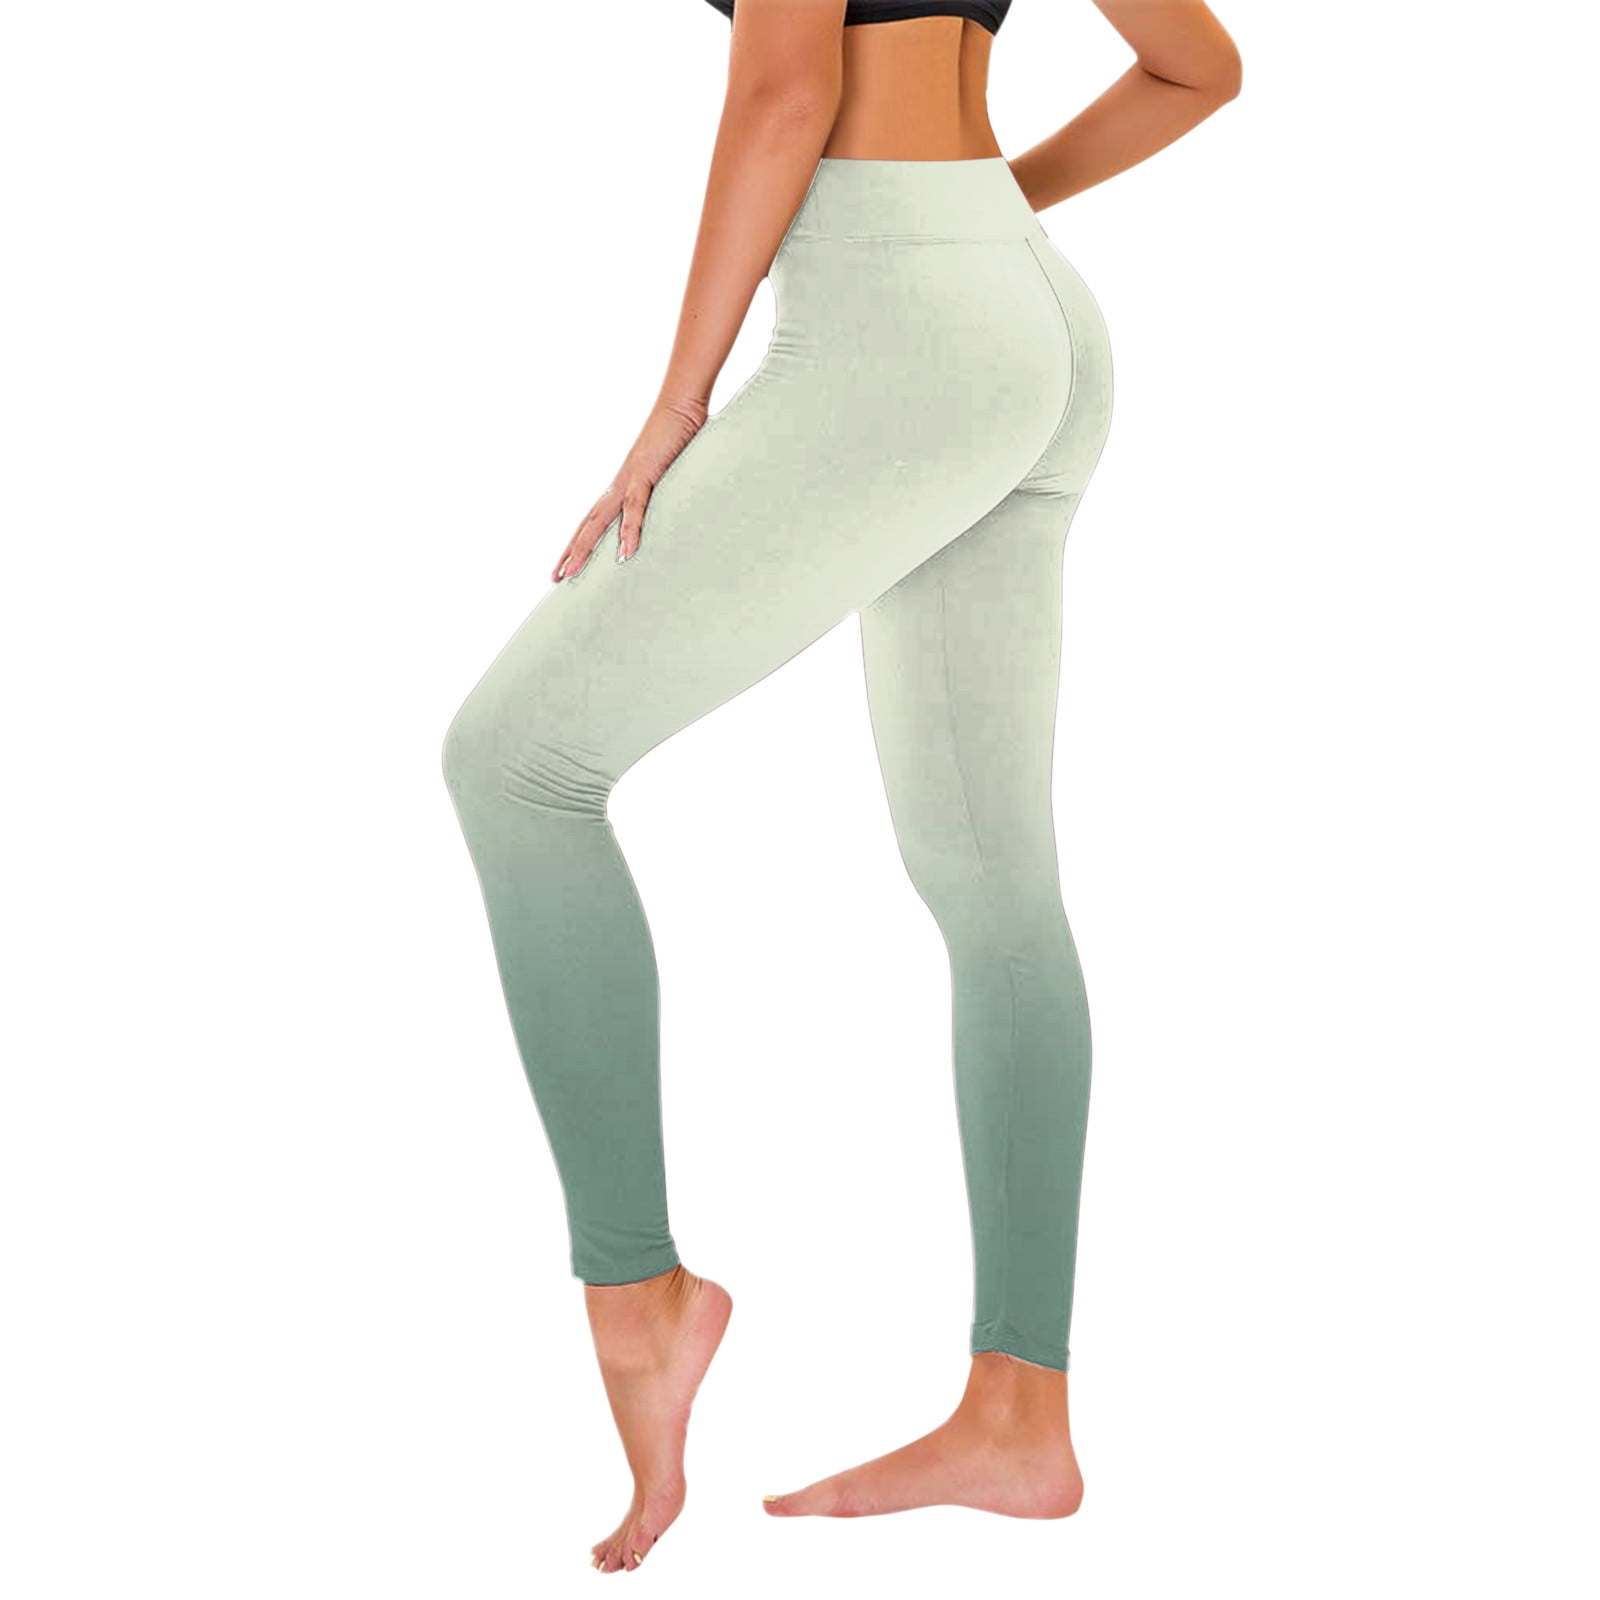 BLVB Yoga Leggings for Women Stretch High Waist Gradient Gym Sports Pants  Scrunch Workout Athletic Tights 